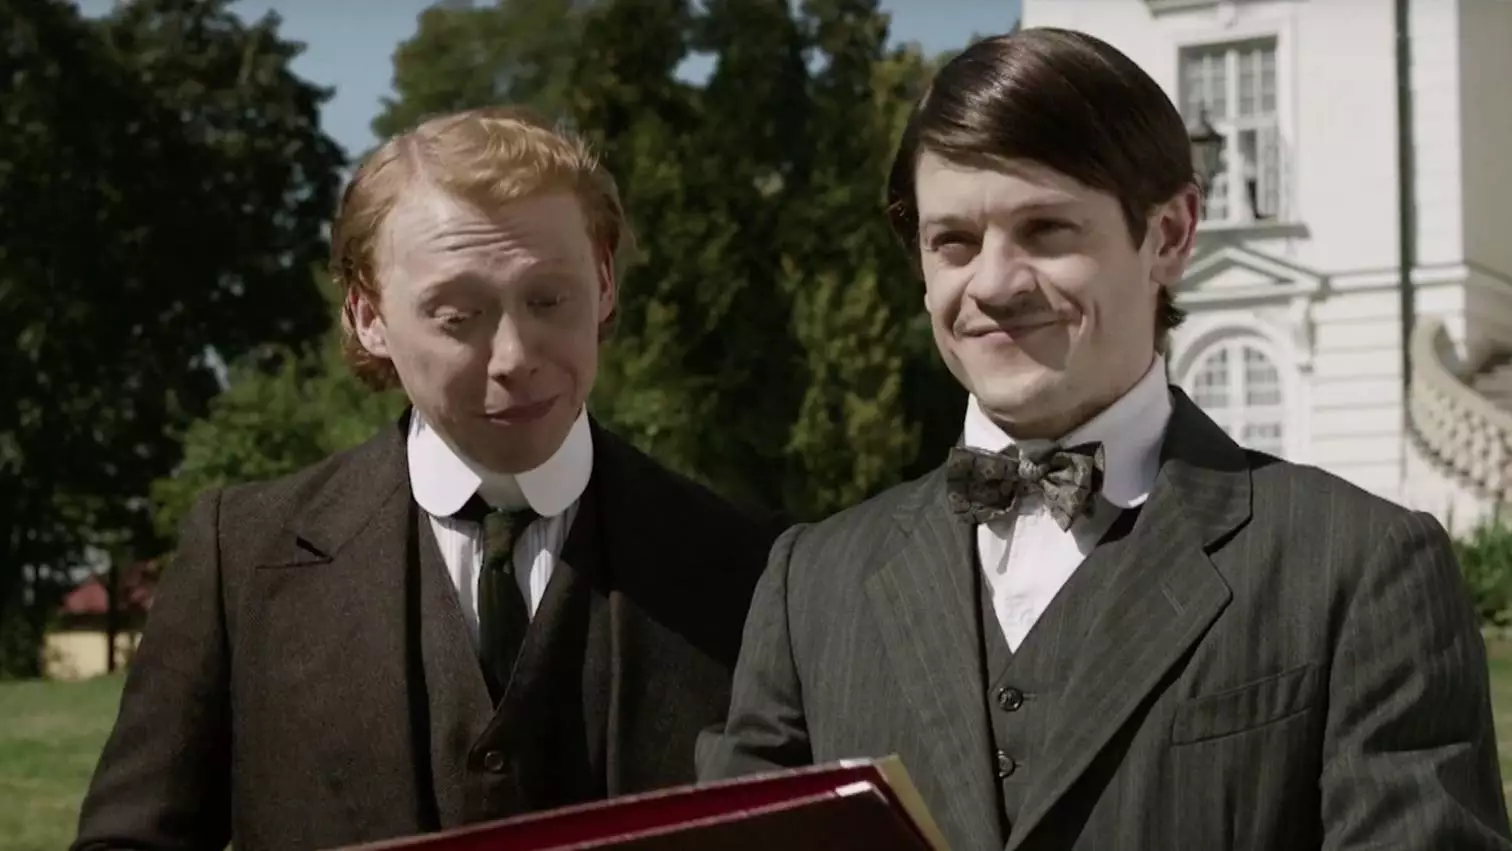 Ramsay Bolton Risen From Dead To Play Adolf Hitler